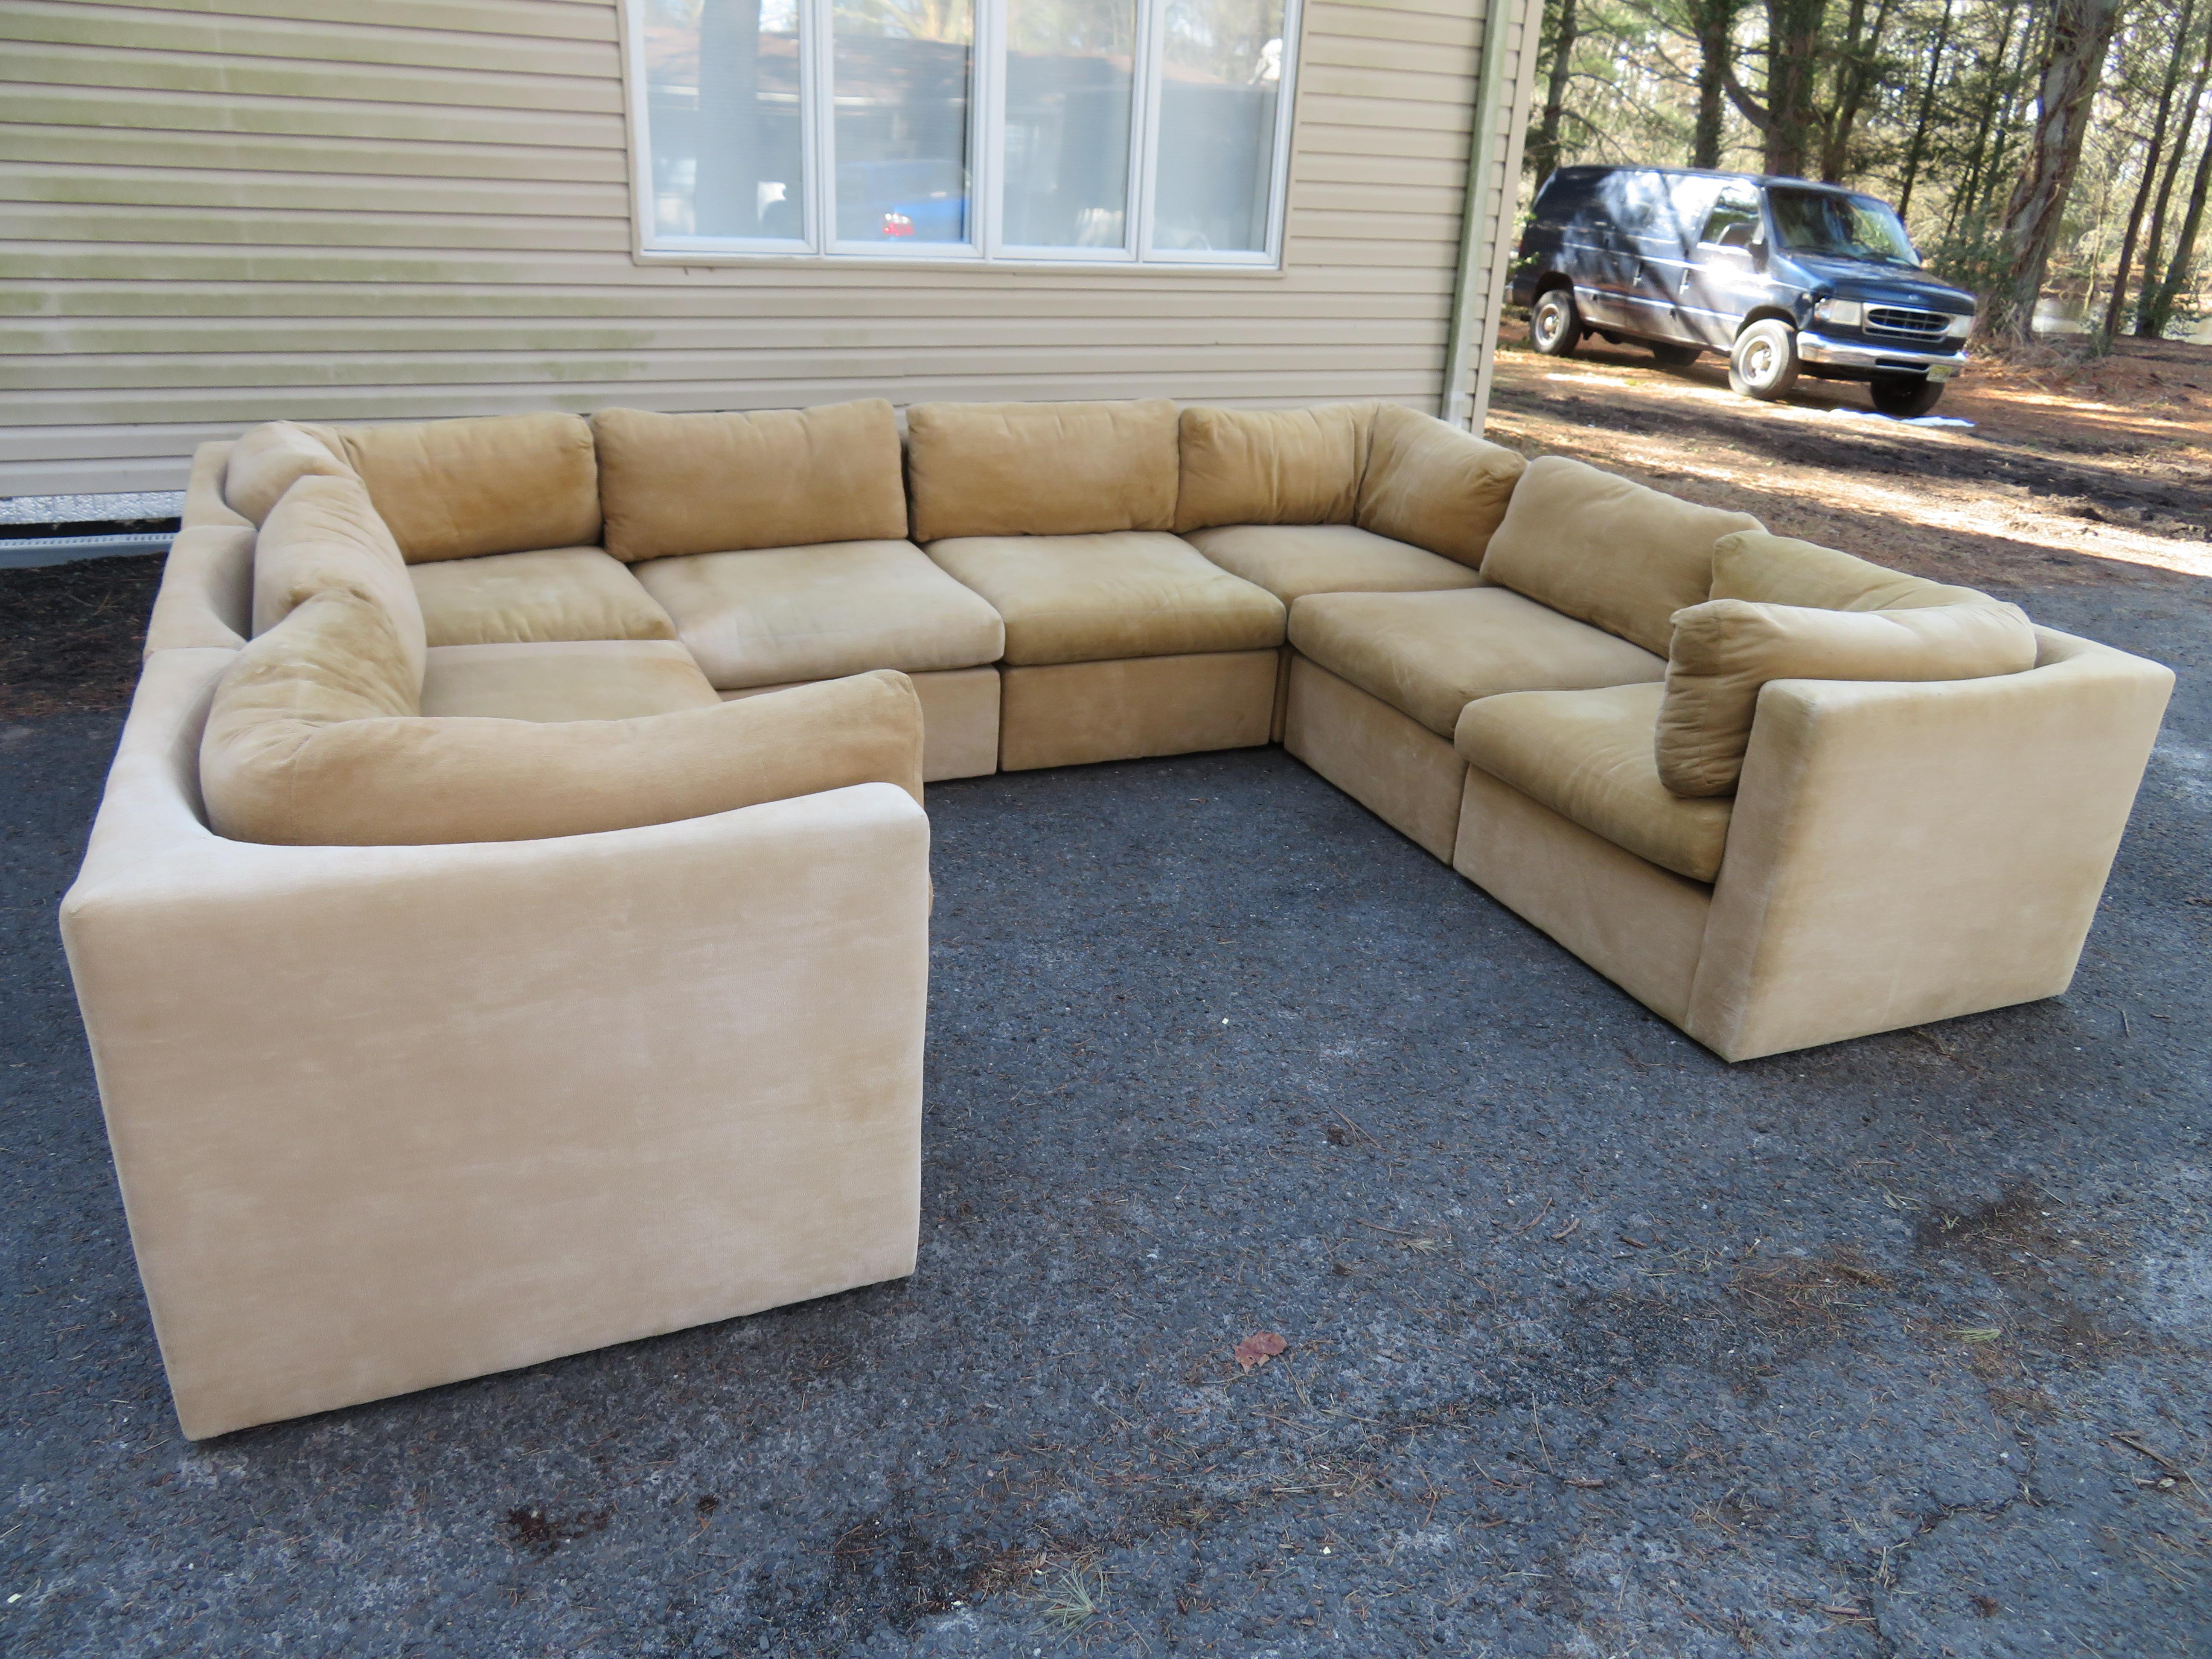 Wonderful signed Milo Baughman 8 piece sectional sofa with unusual curved seat backs. The original fabric on this sectional is presentable and could be used as is-some fading and wear. This sectional consists of 4 corners and 4 armless sections.